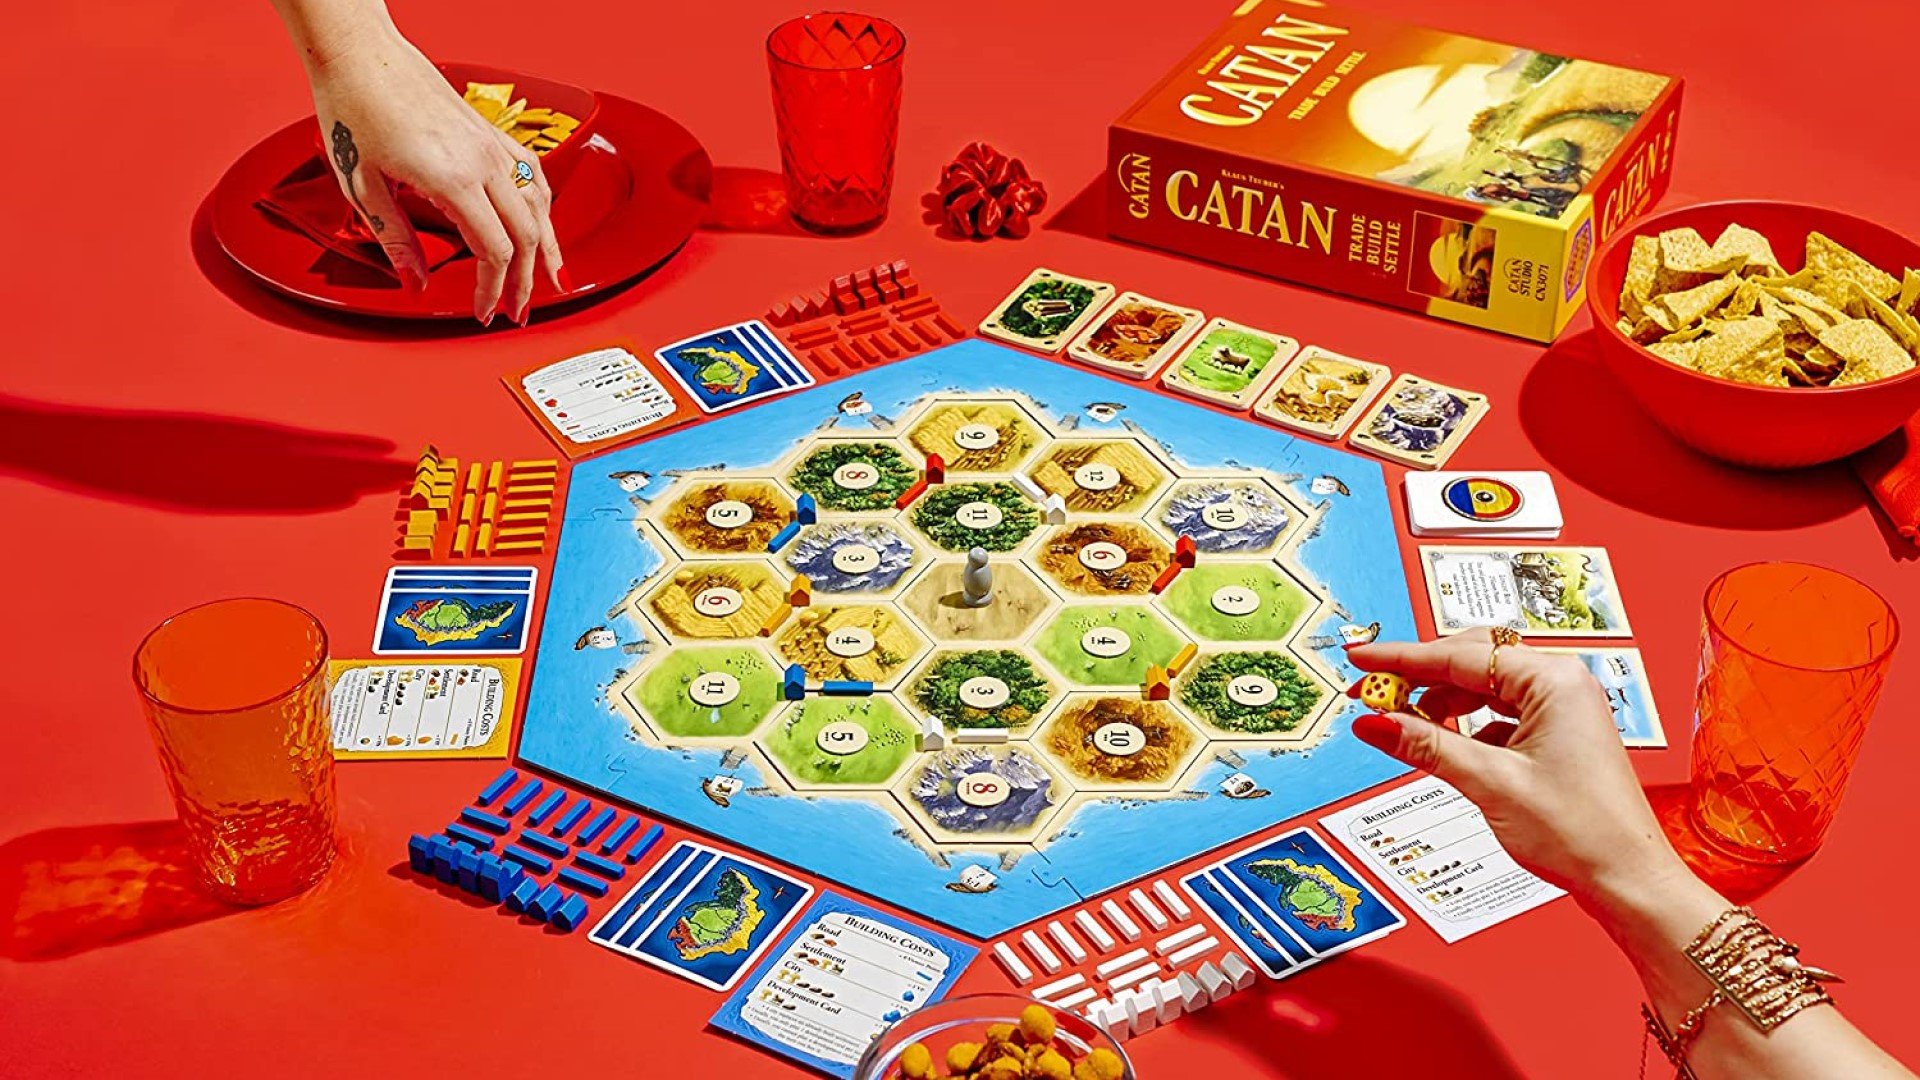 Best classic board games: Catan. Image shows a group of people playing catan with snacks set up around the board on a red background.